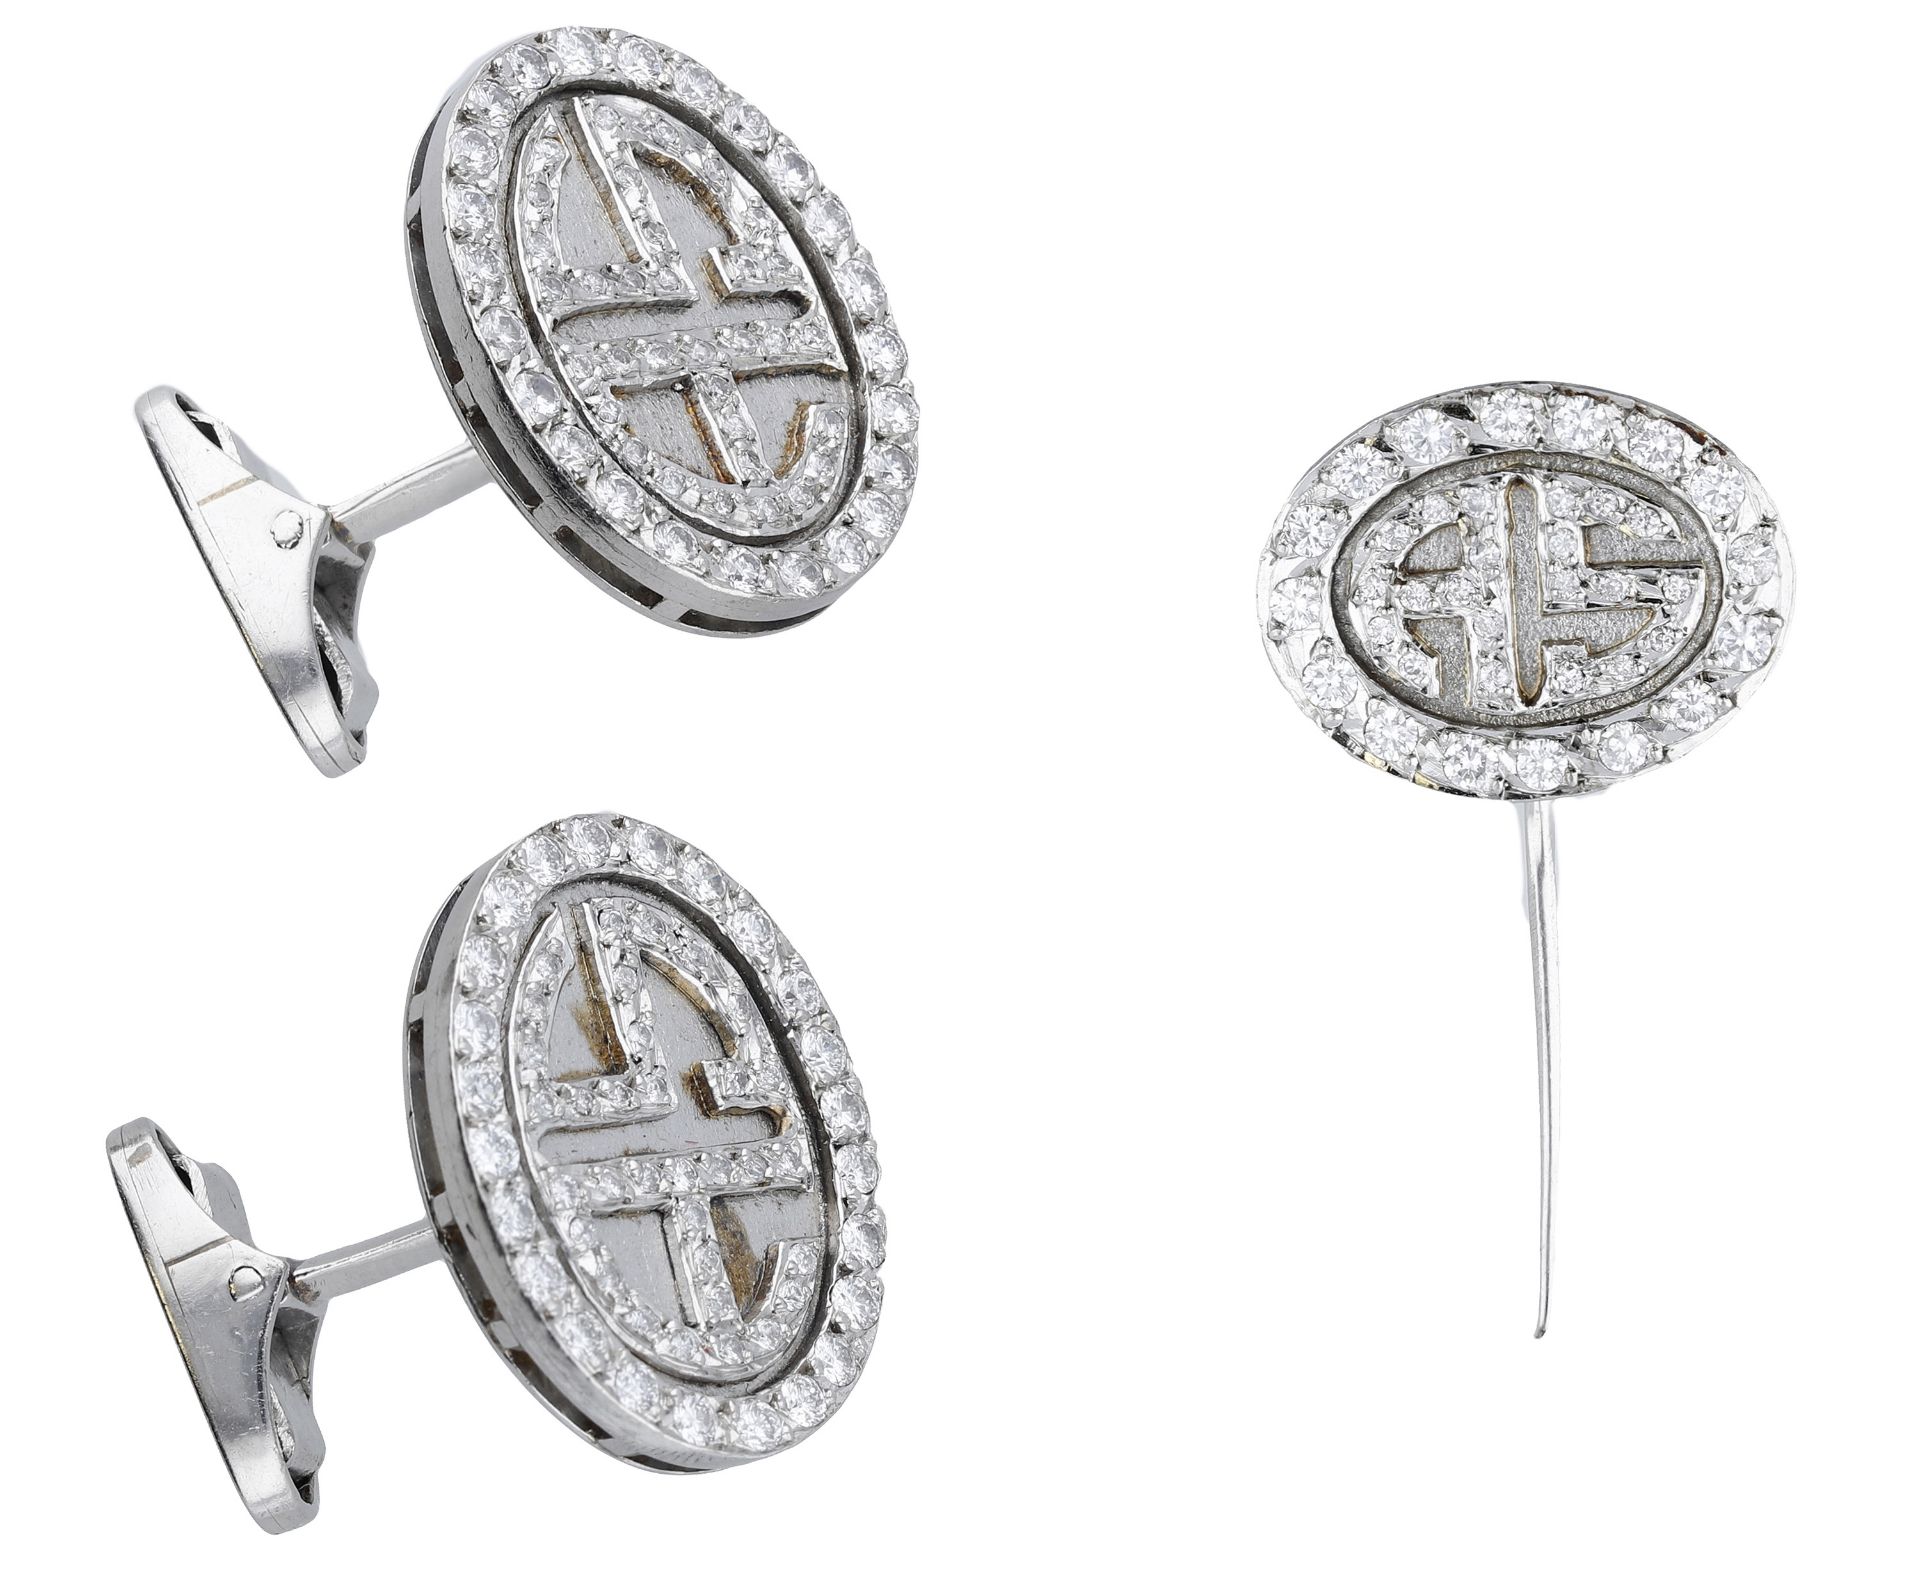 A diamond cufflink and tie pin suite, the oval plaques with applied brilliant-cut diamond mo...